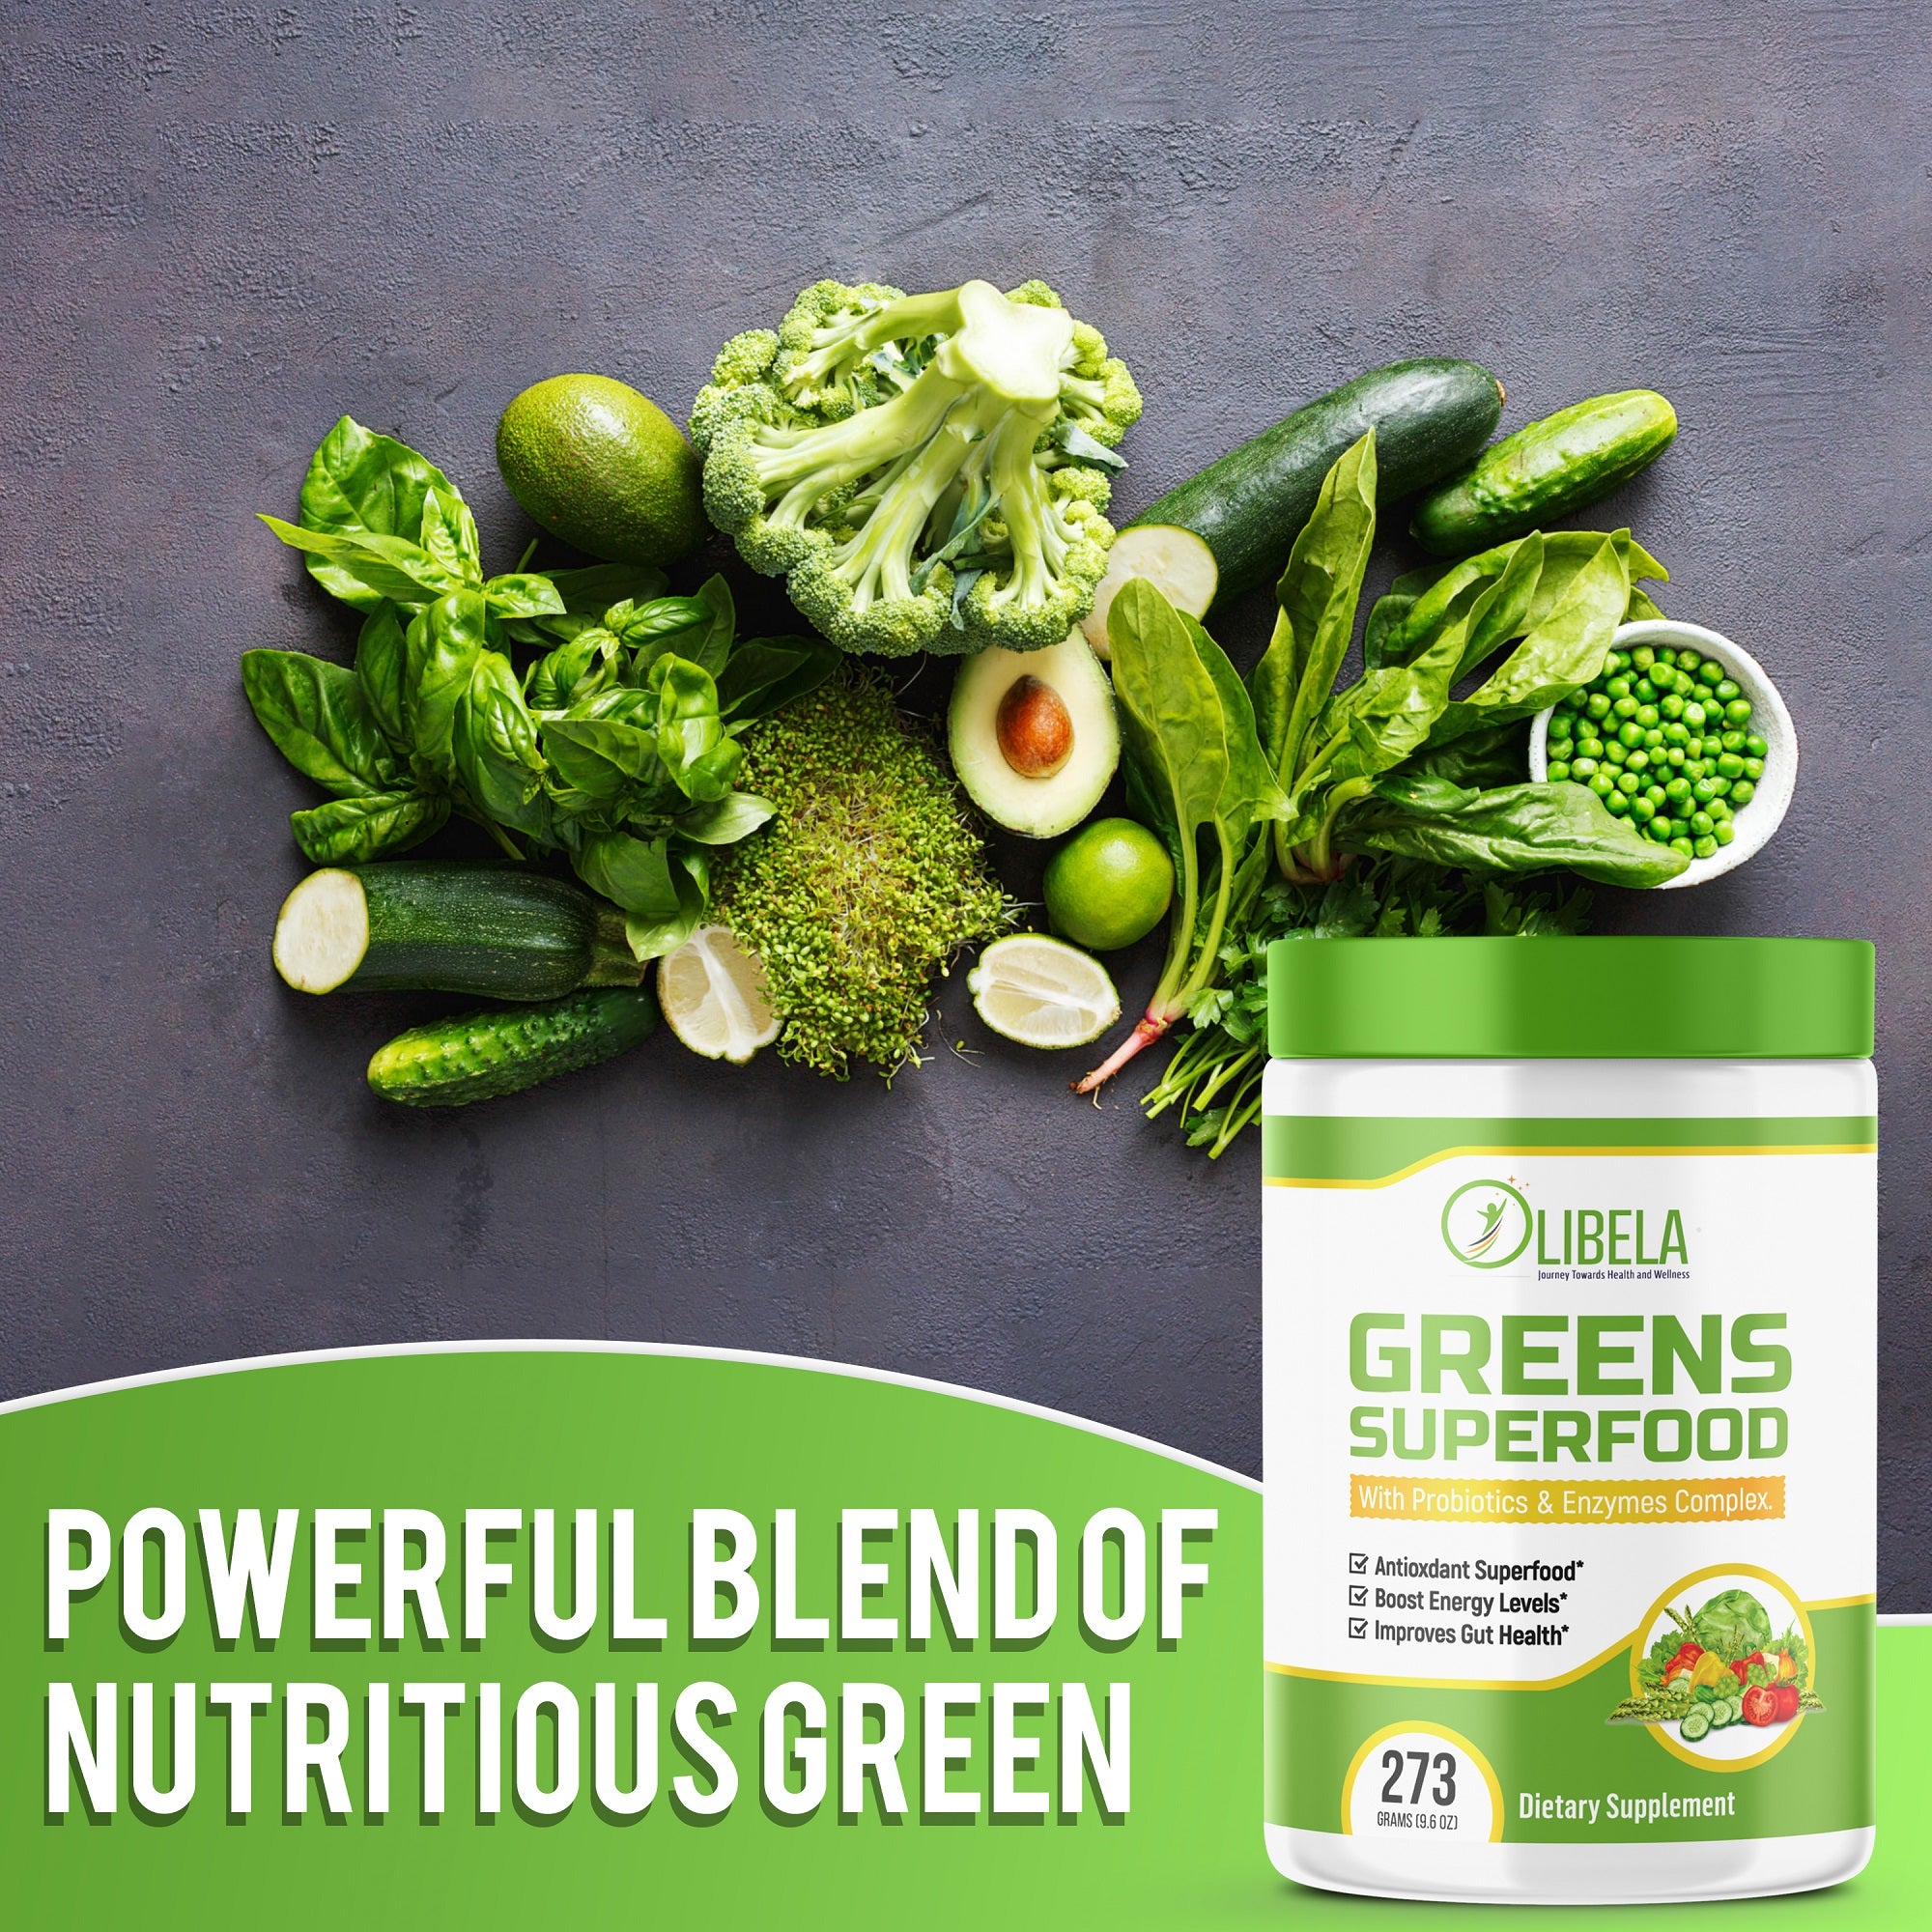 Greens Powder Superfood - With Probiotics And Prebiotics, Digestive Enzyme Complex, Beet Root Powder, Original Antioxidants, and Organic Greens. Boost Energy Levels And Improve Gut Health, 9.6oz (273g)